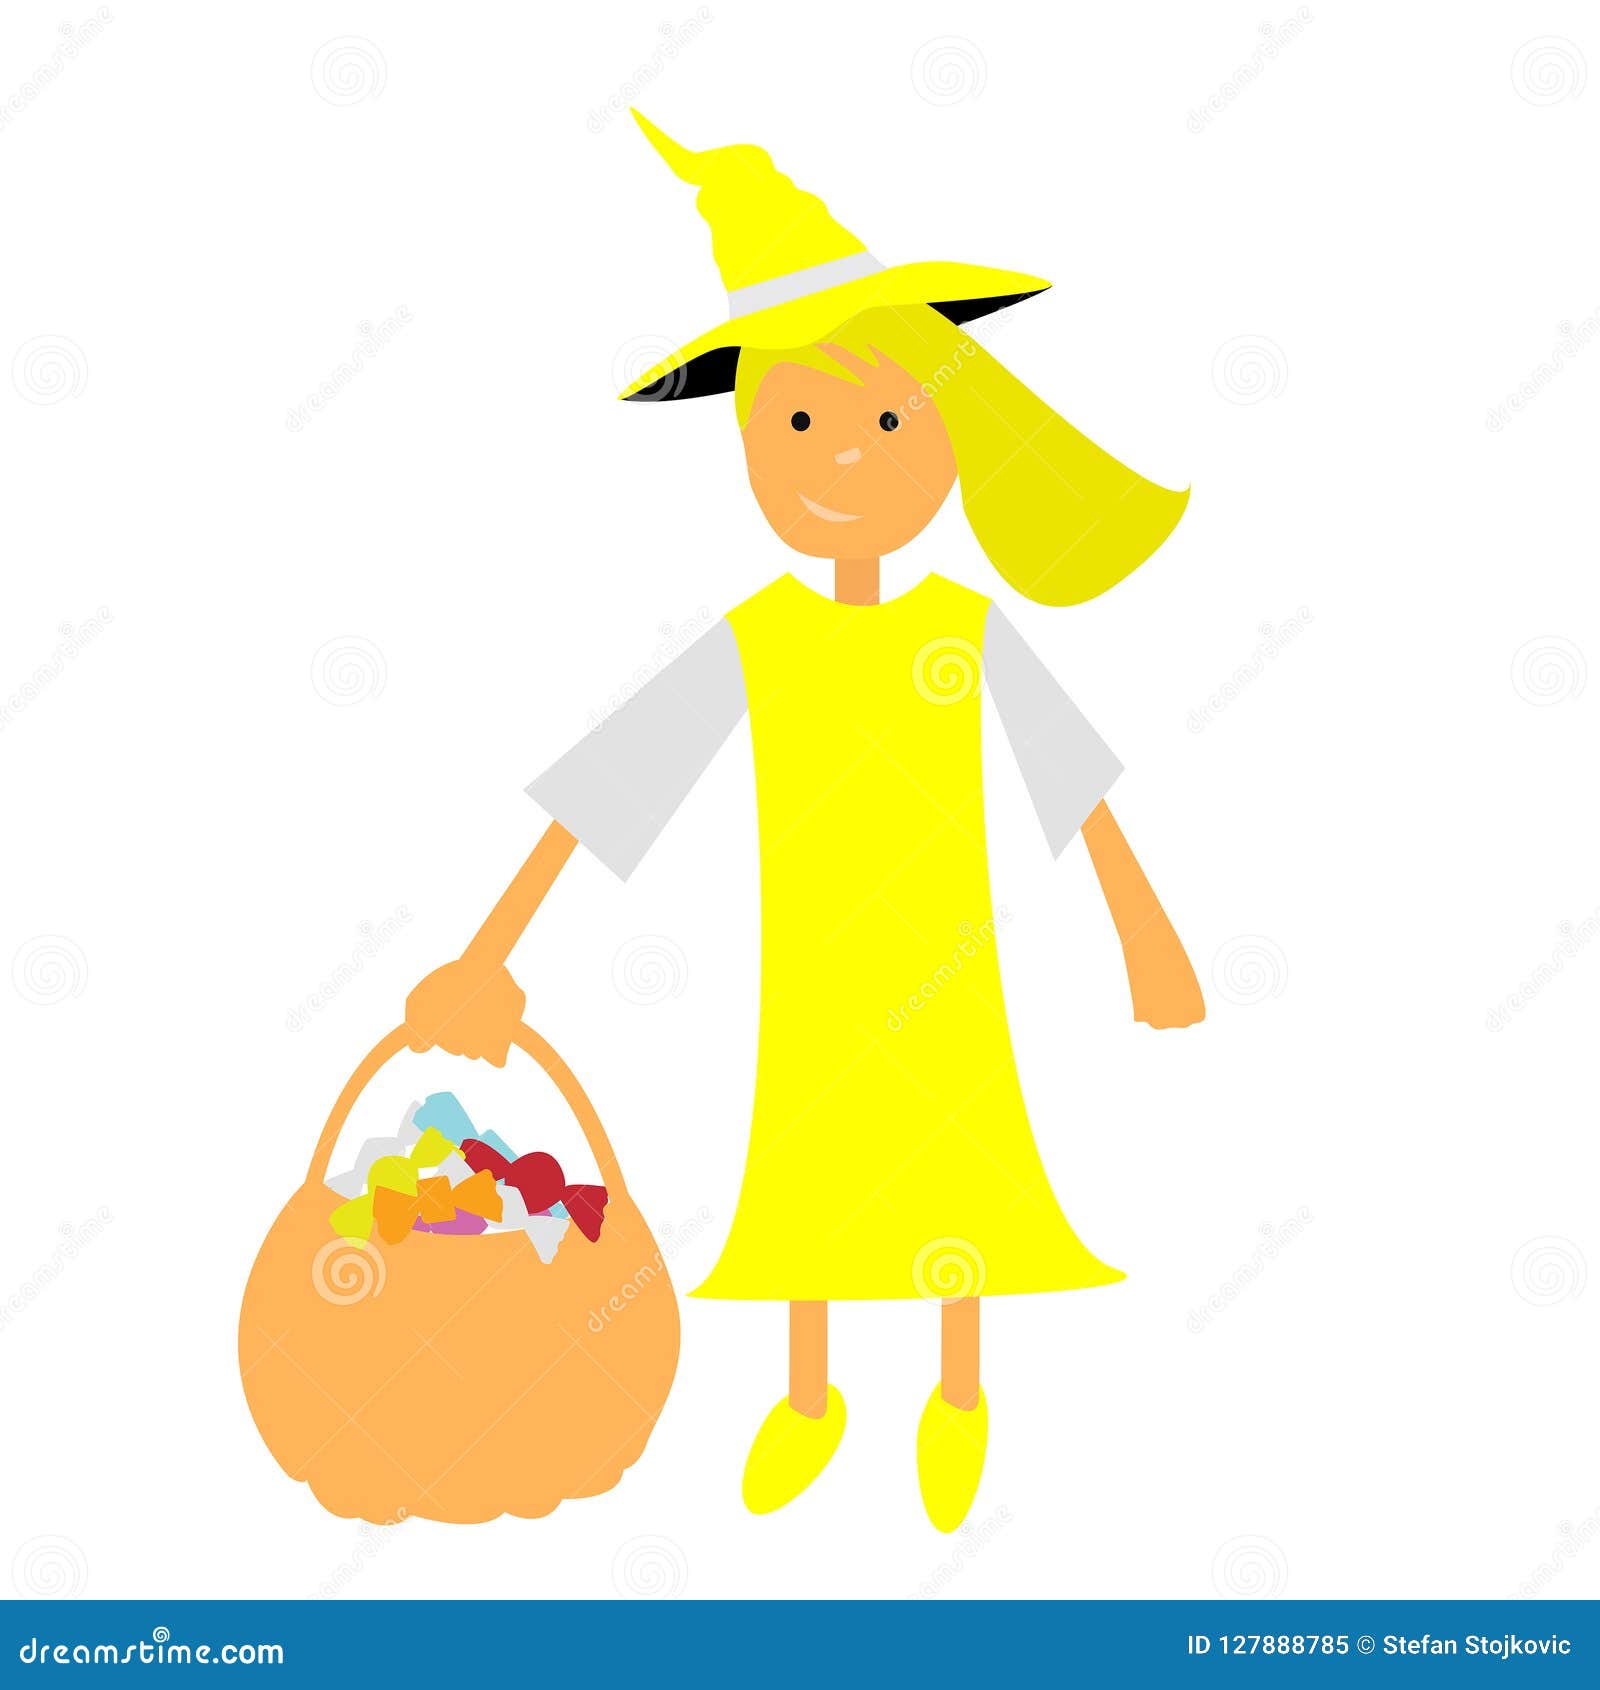 Illustration about Halloween vector witch with a basket and yellow dress ye...